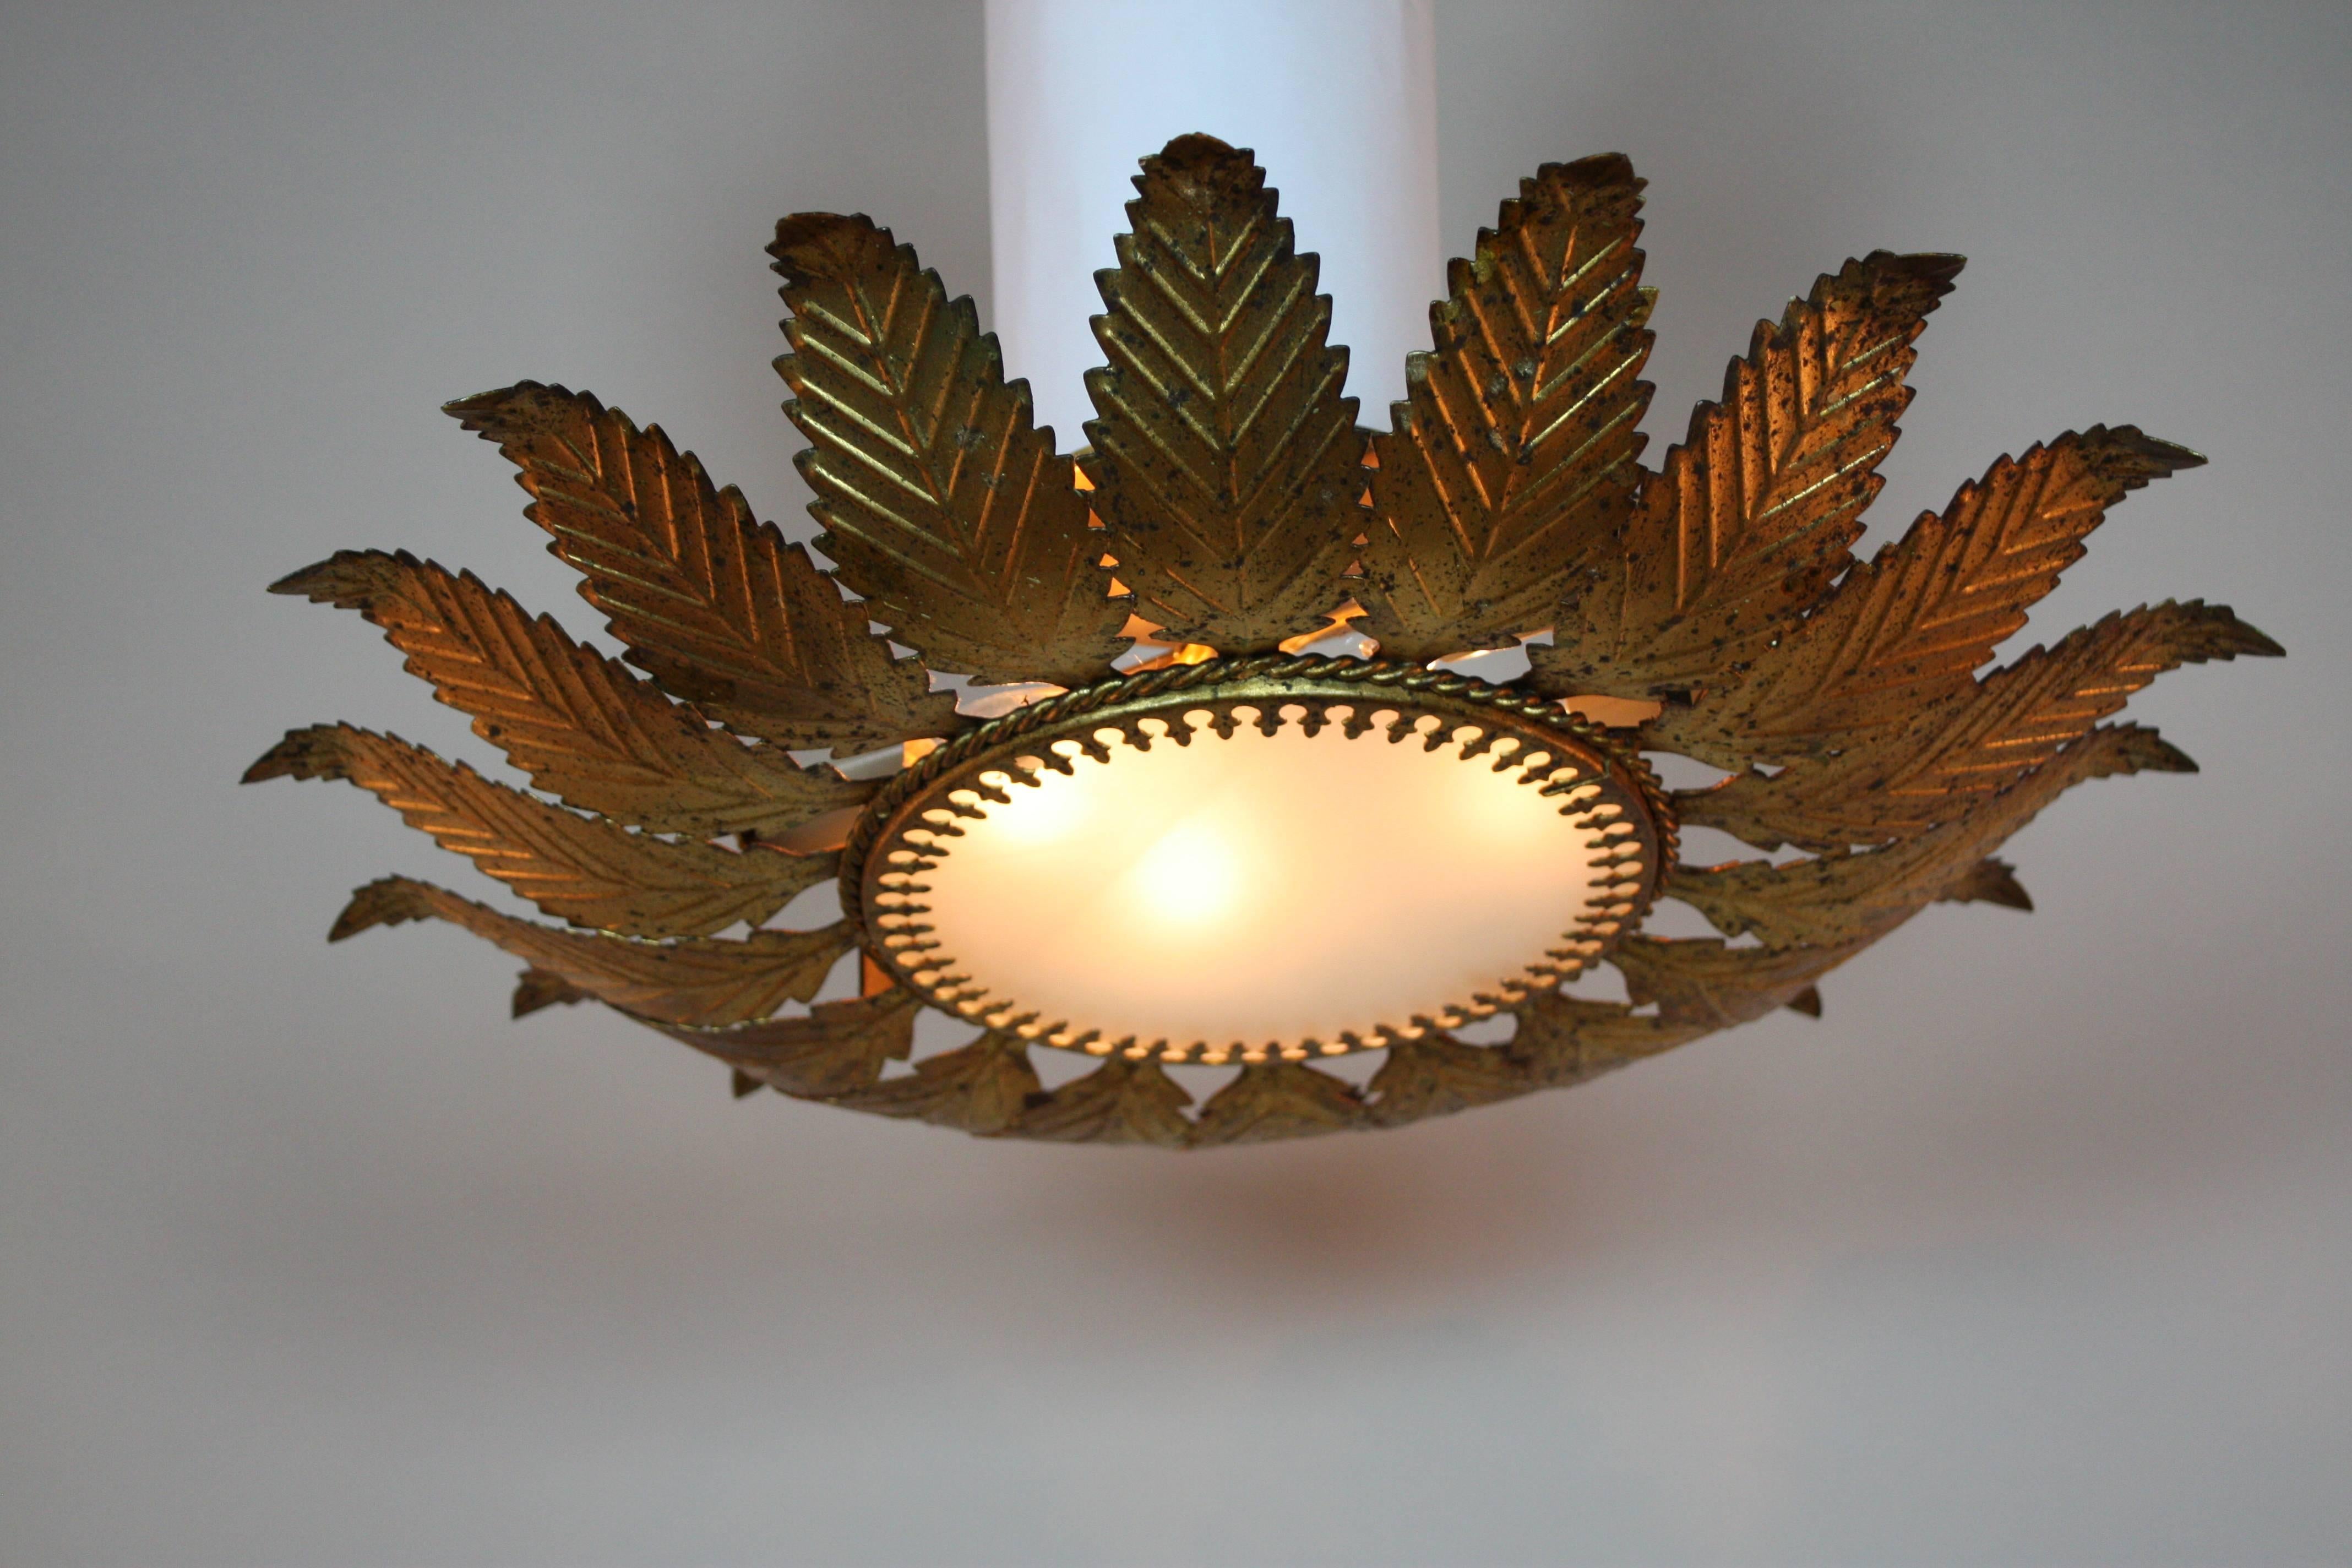 A stunning flush mounted ceiling fixture. Made in Spain during the 1950s, the Classic era for unusual art work, this fabulous piece features four lights and an elegant floral inspired design. A beautiful combination of art and craftsmanship, this